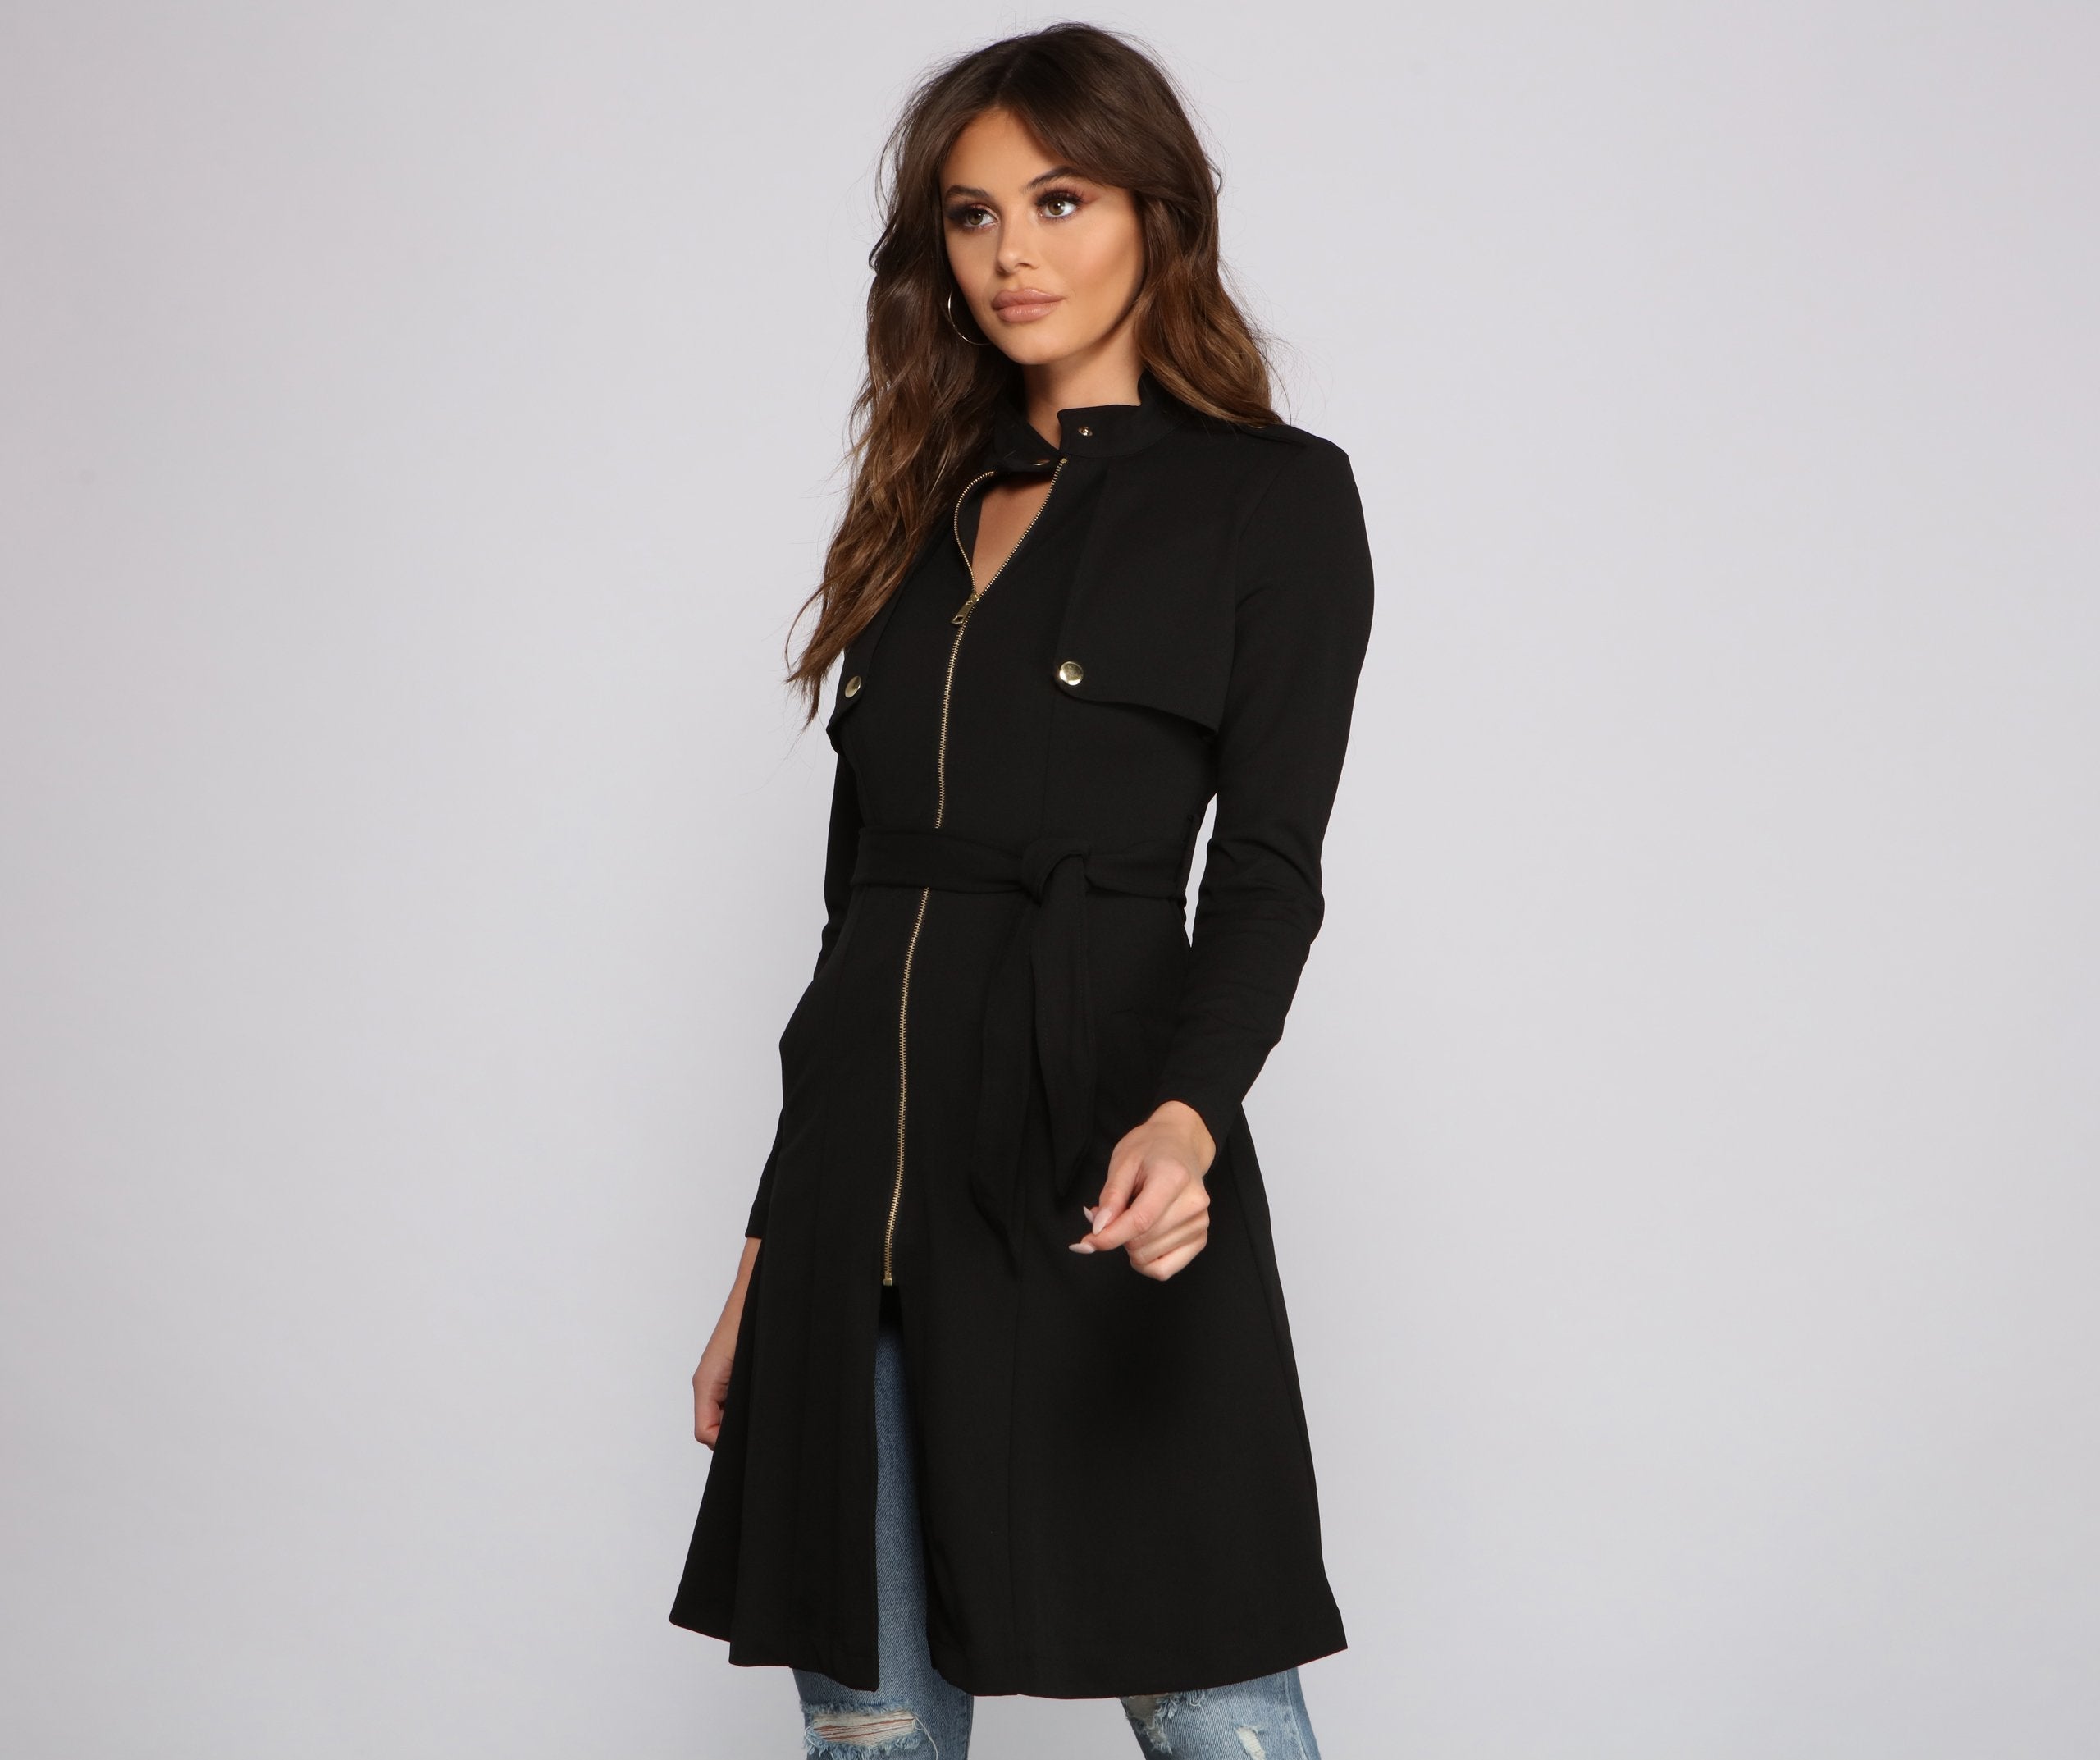 Belted Sophistication Crepe Trench Dress - Lady Occasions